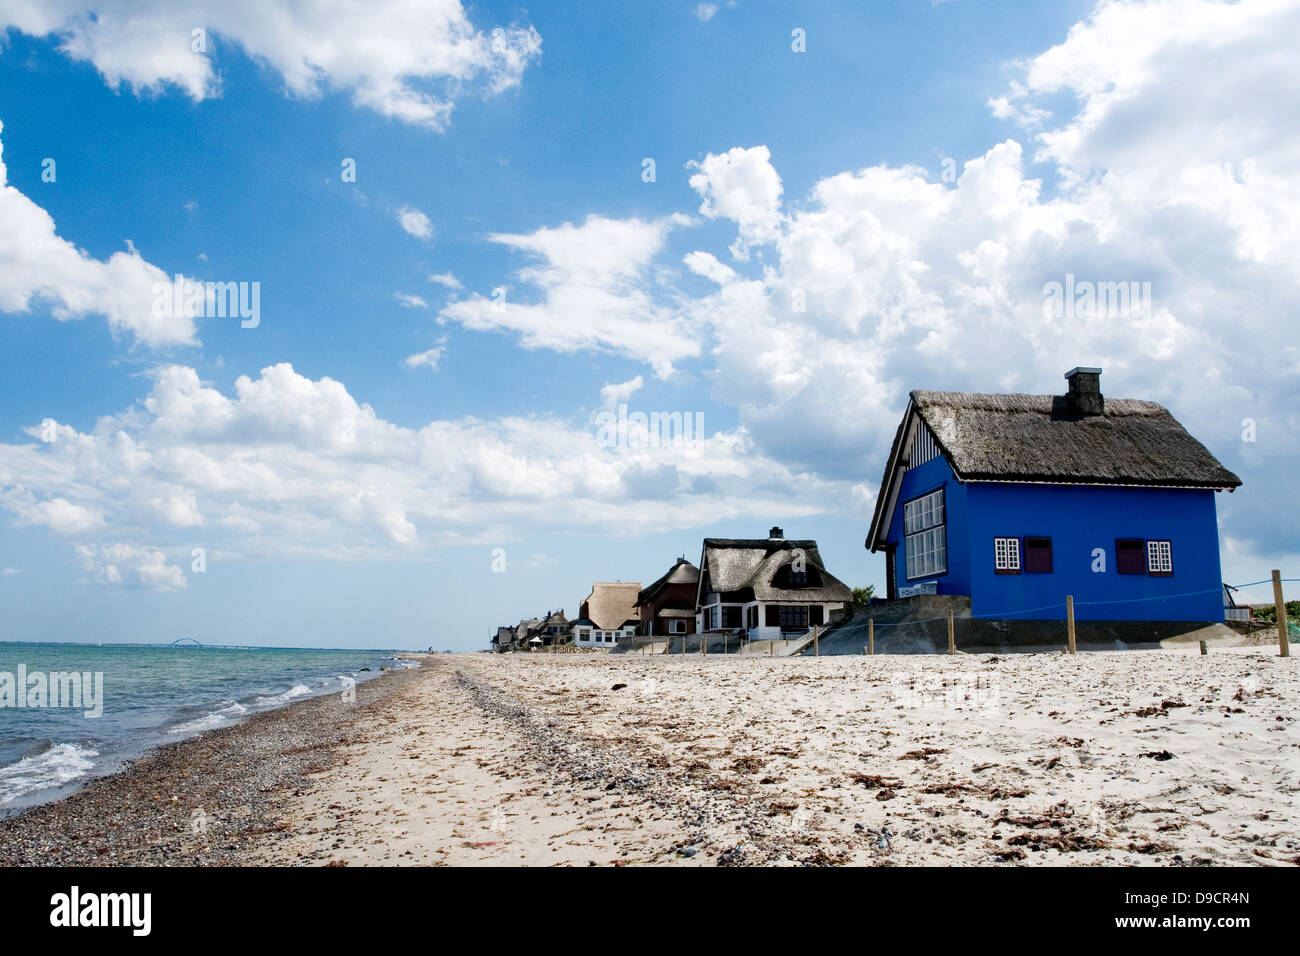 Summer cottages on the Baltic Sea Stock Photo